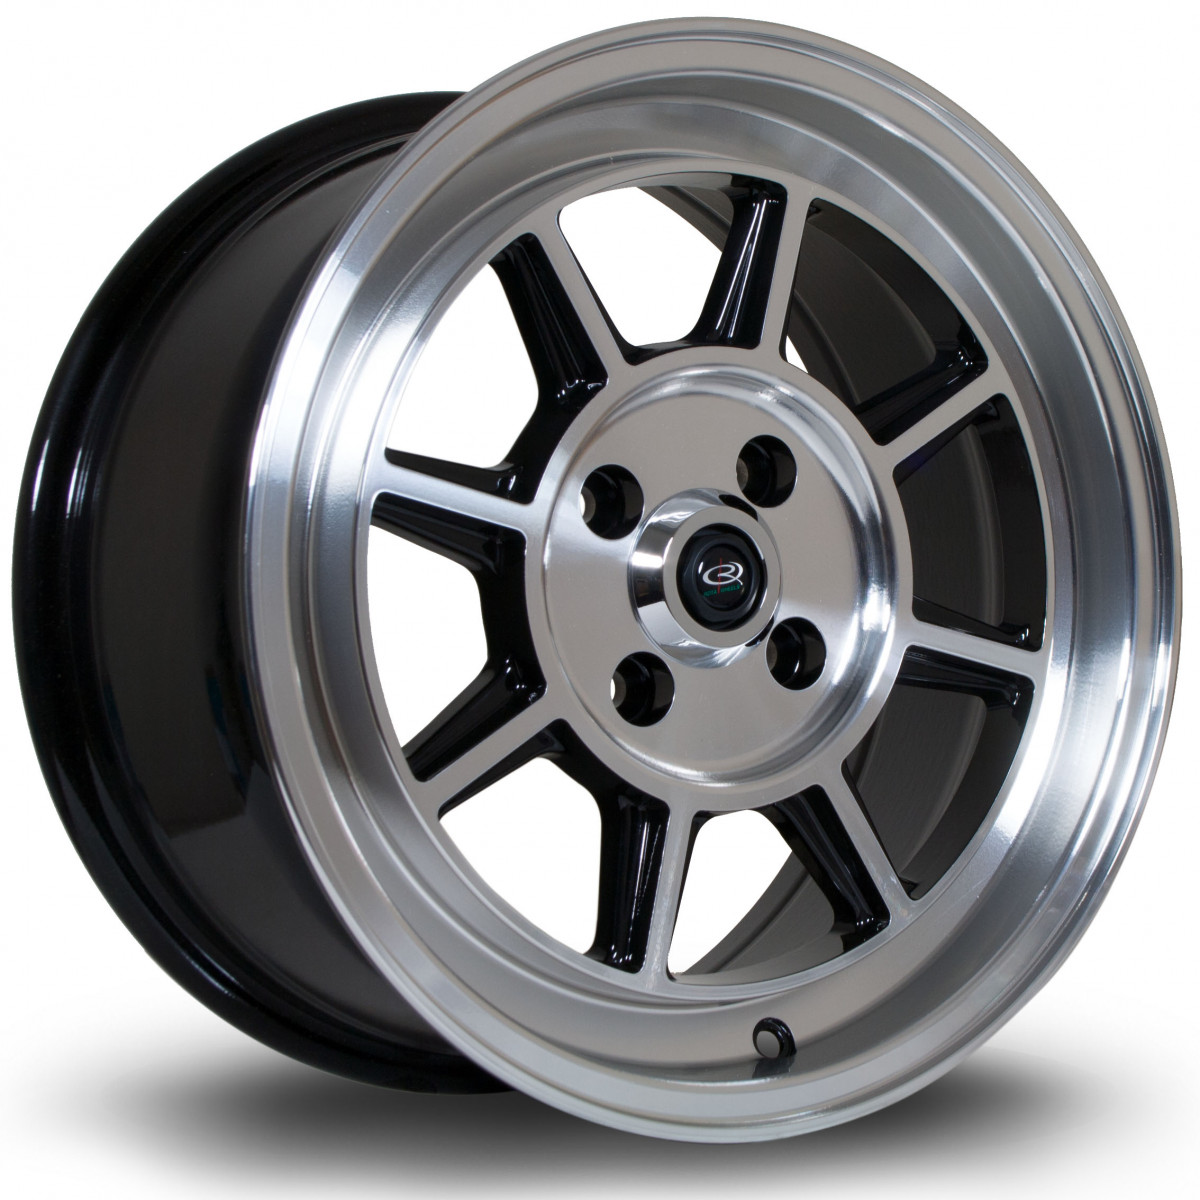 BM8 15x7 4x100 ET35 Gloss Black with Polished Face